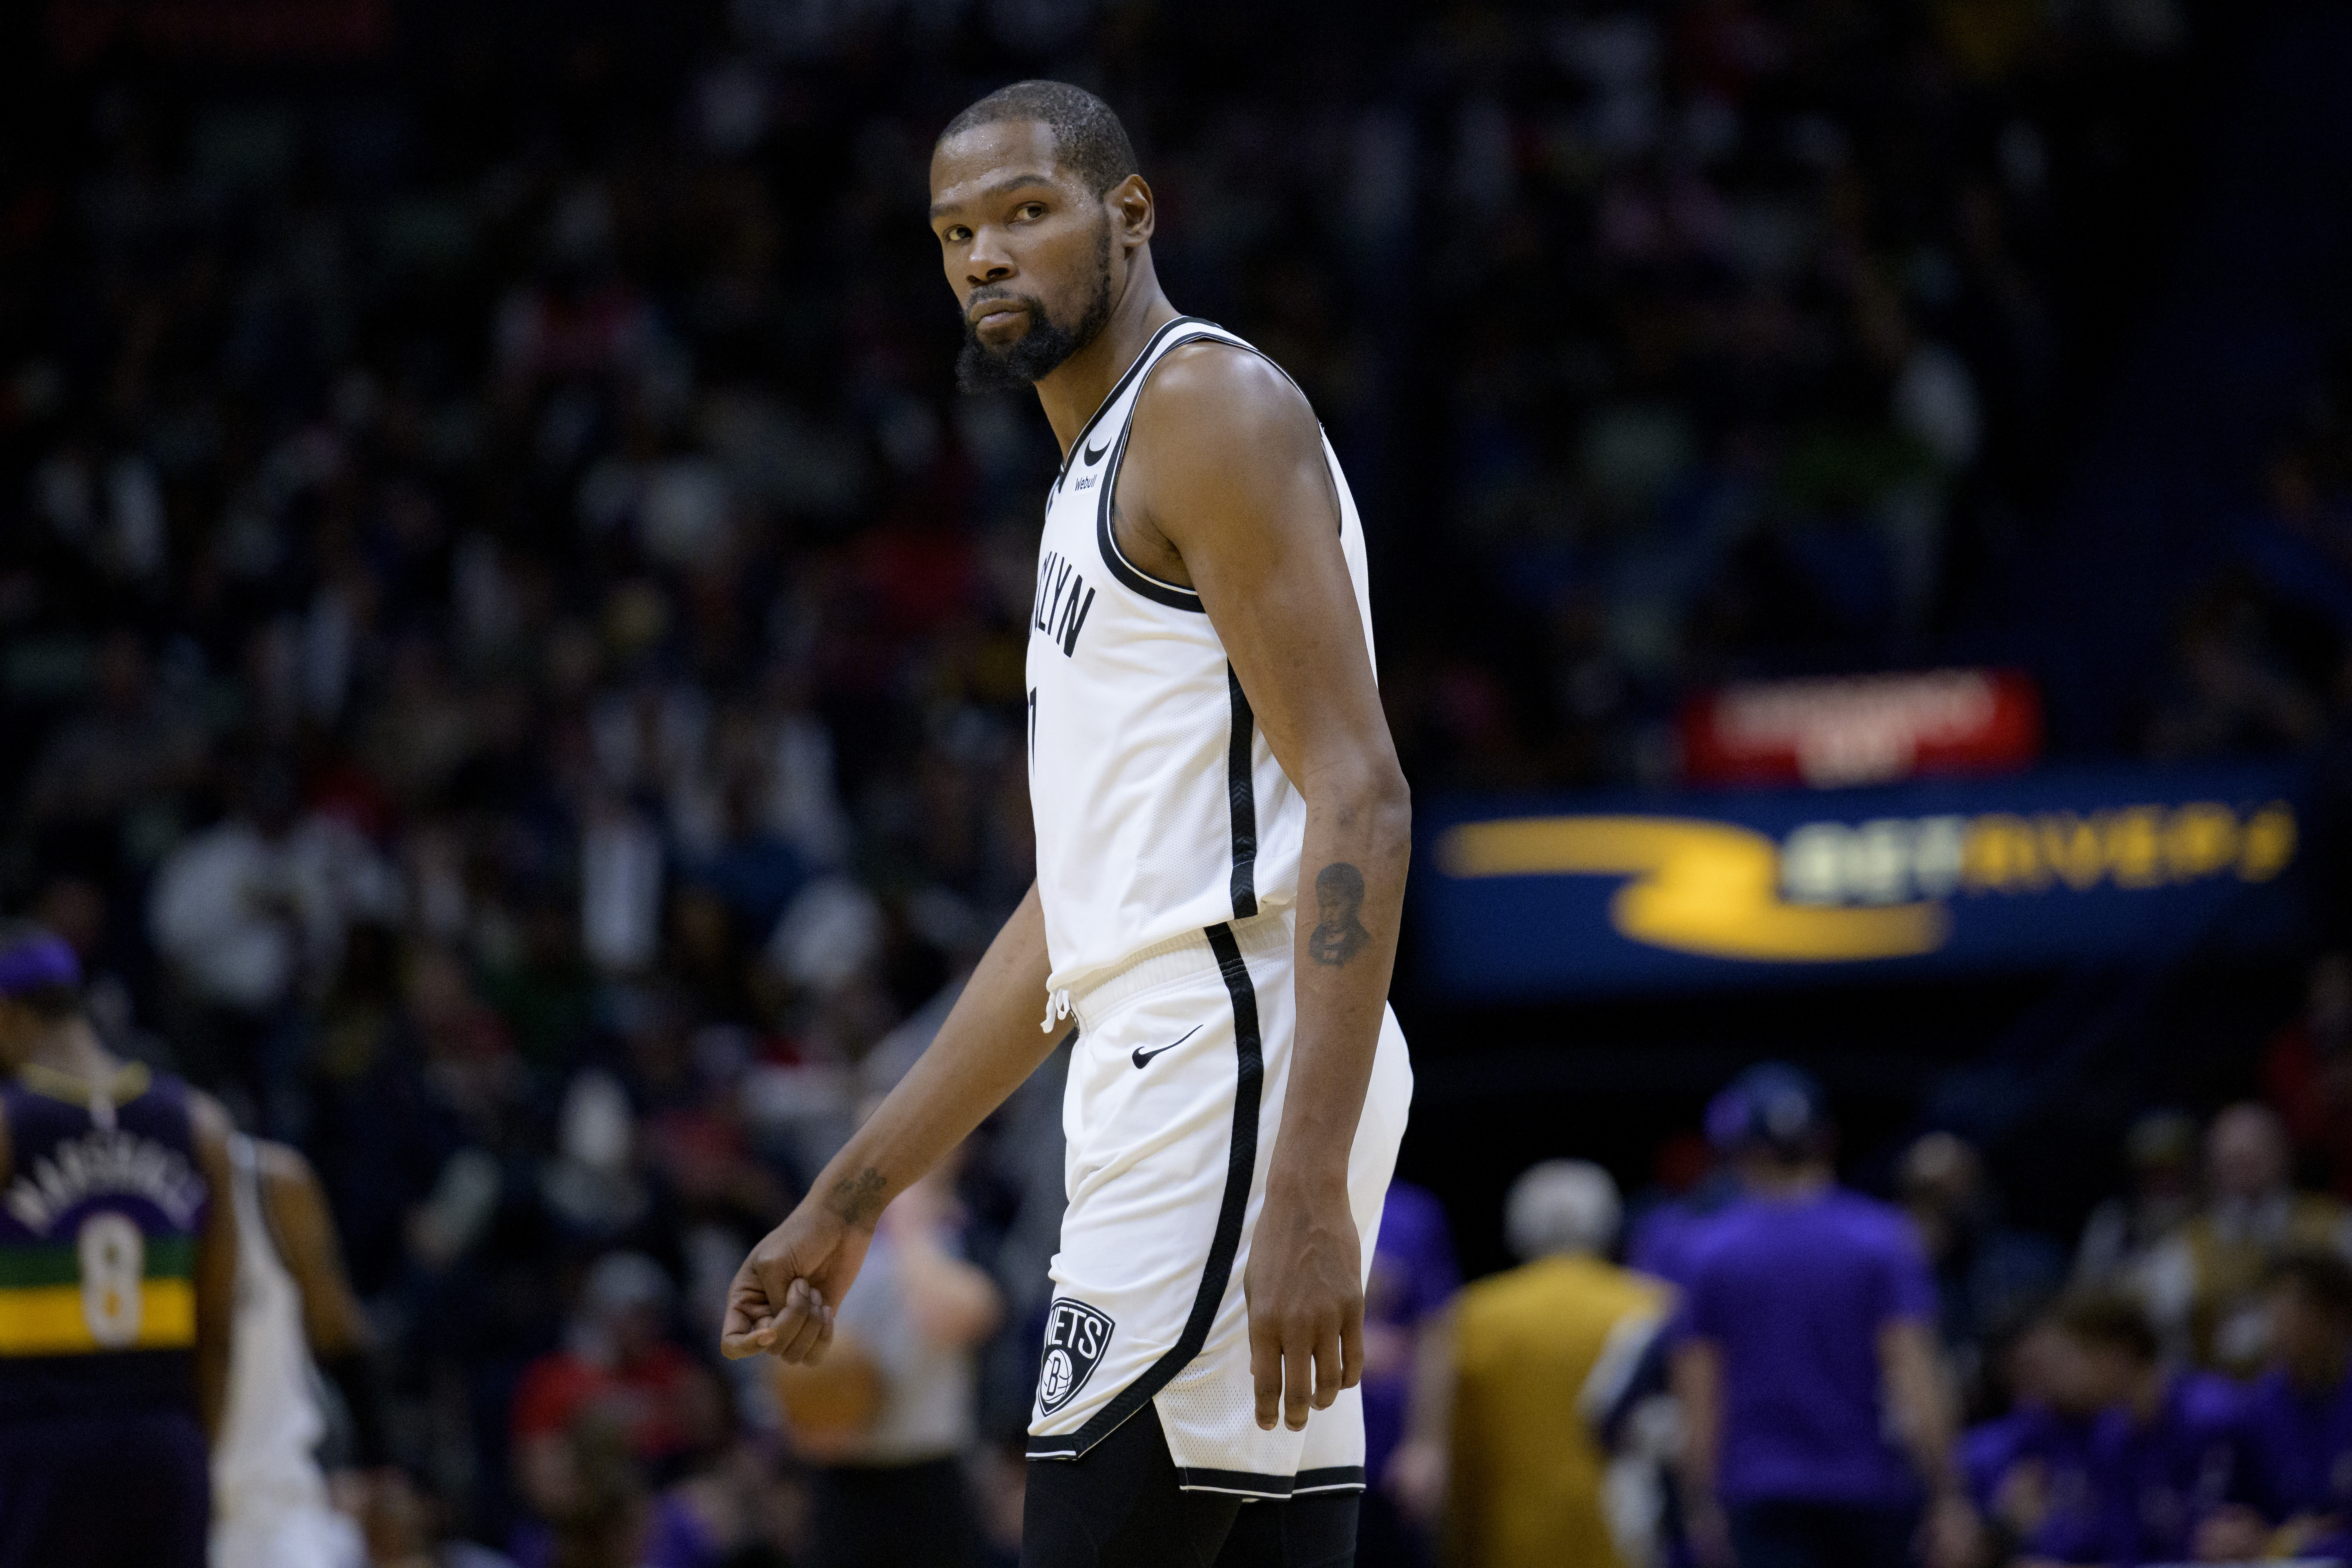 Kevin Durant Suns jersey  How to get Suns jerseys, t-shirts, autographs  online after reported trade 